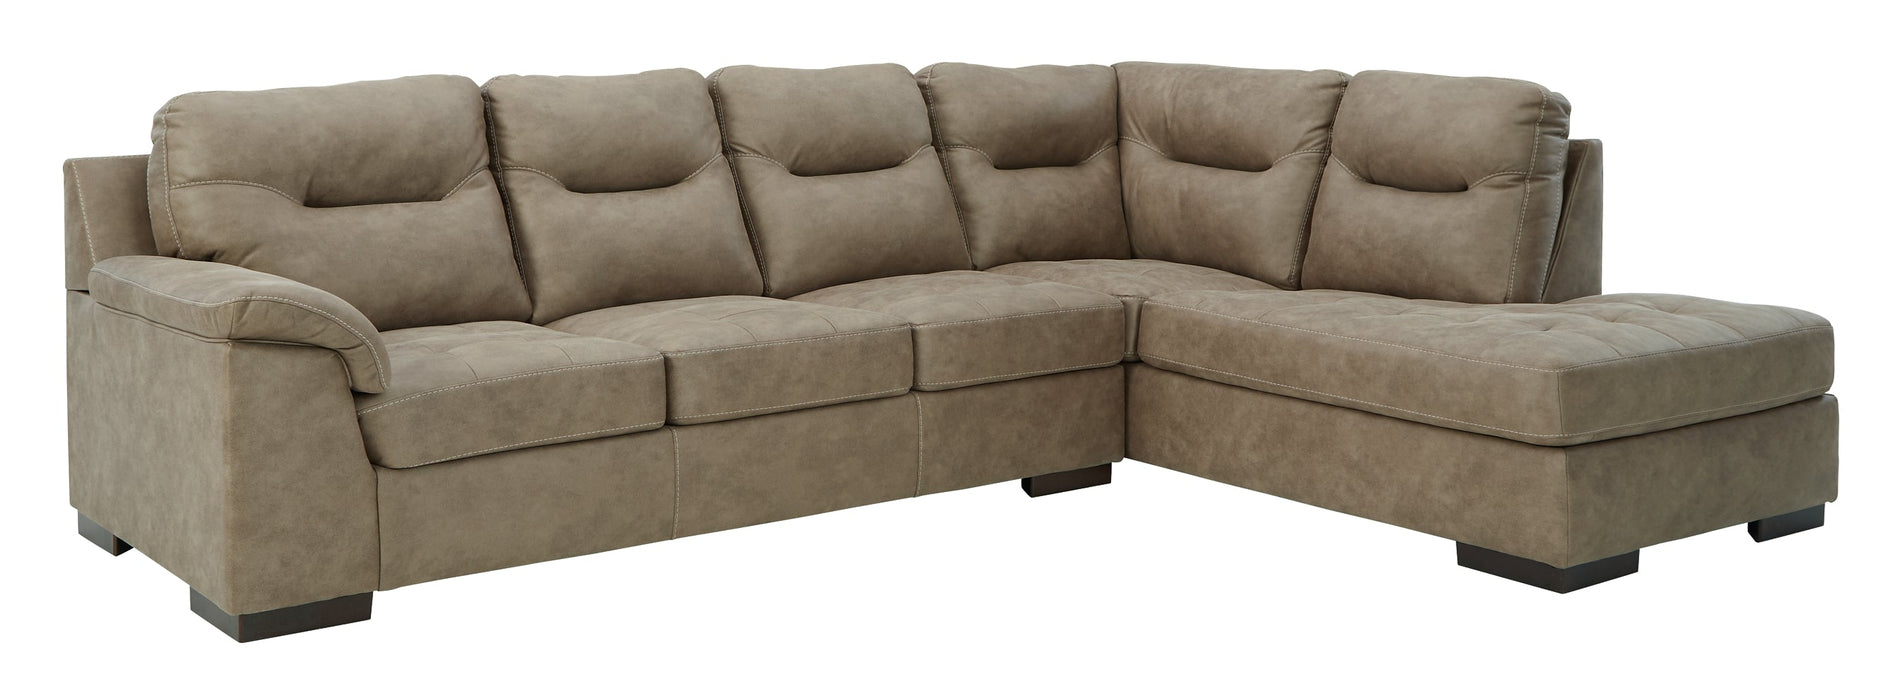 Maderla 2-Piece Sectional with Ottoman JR Furniture Storefurniture, home furniture, home decor